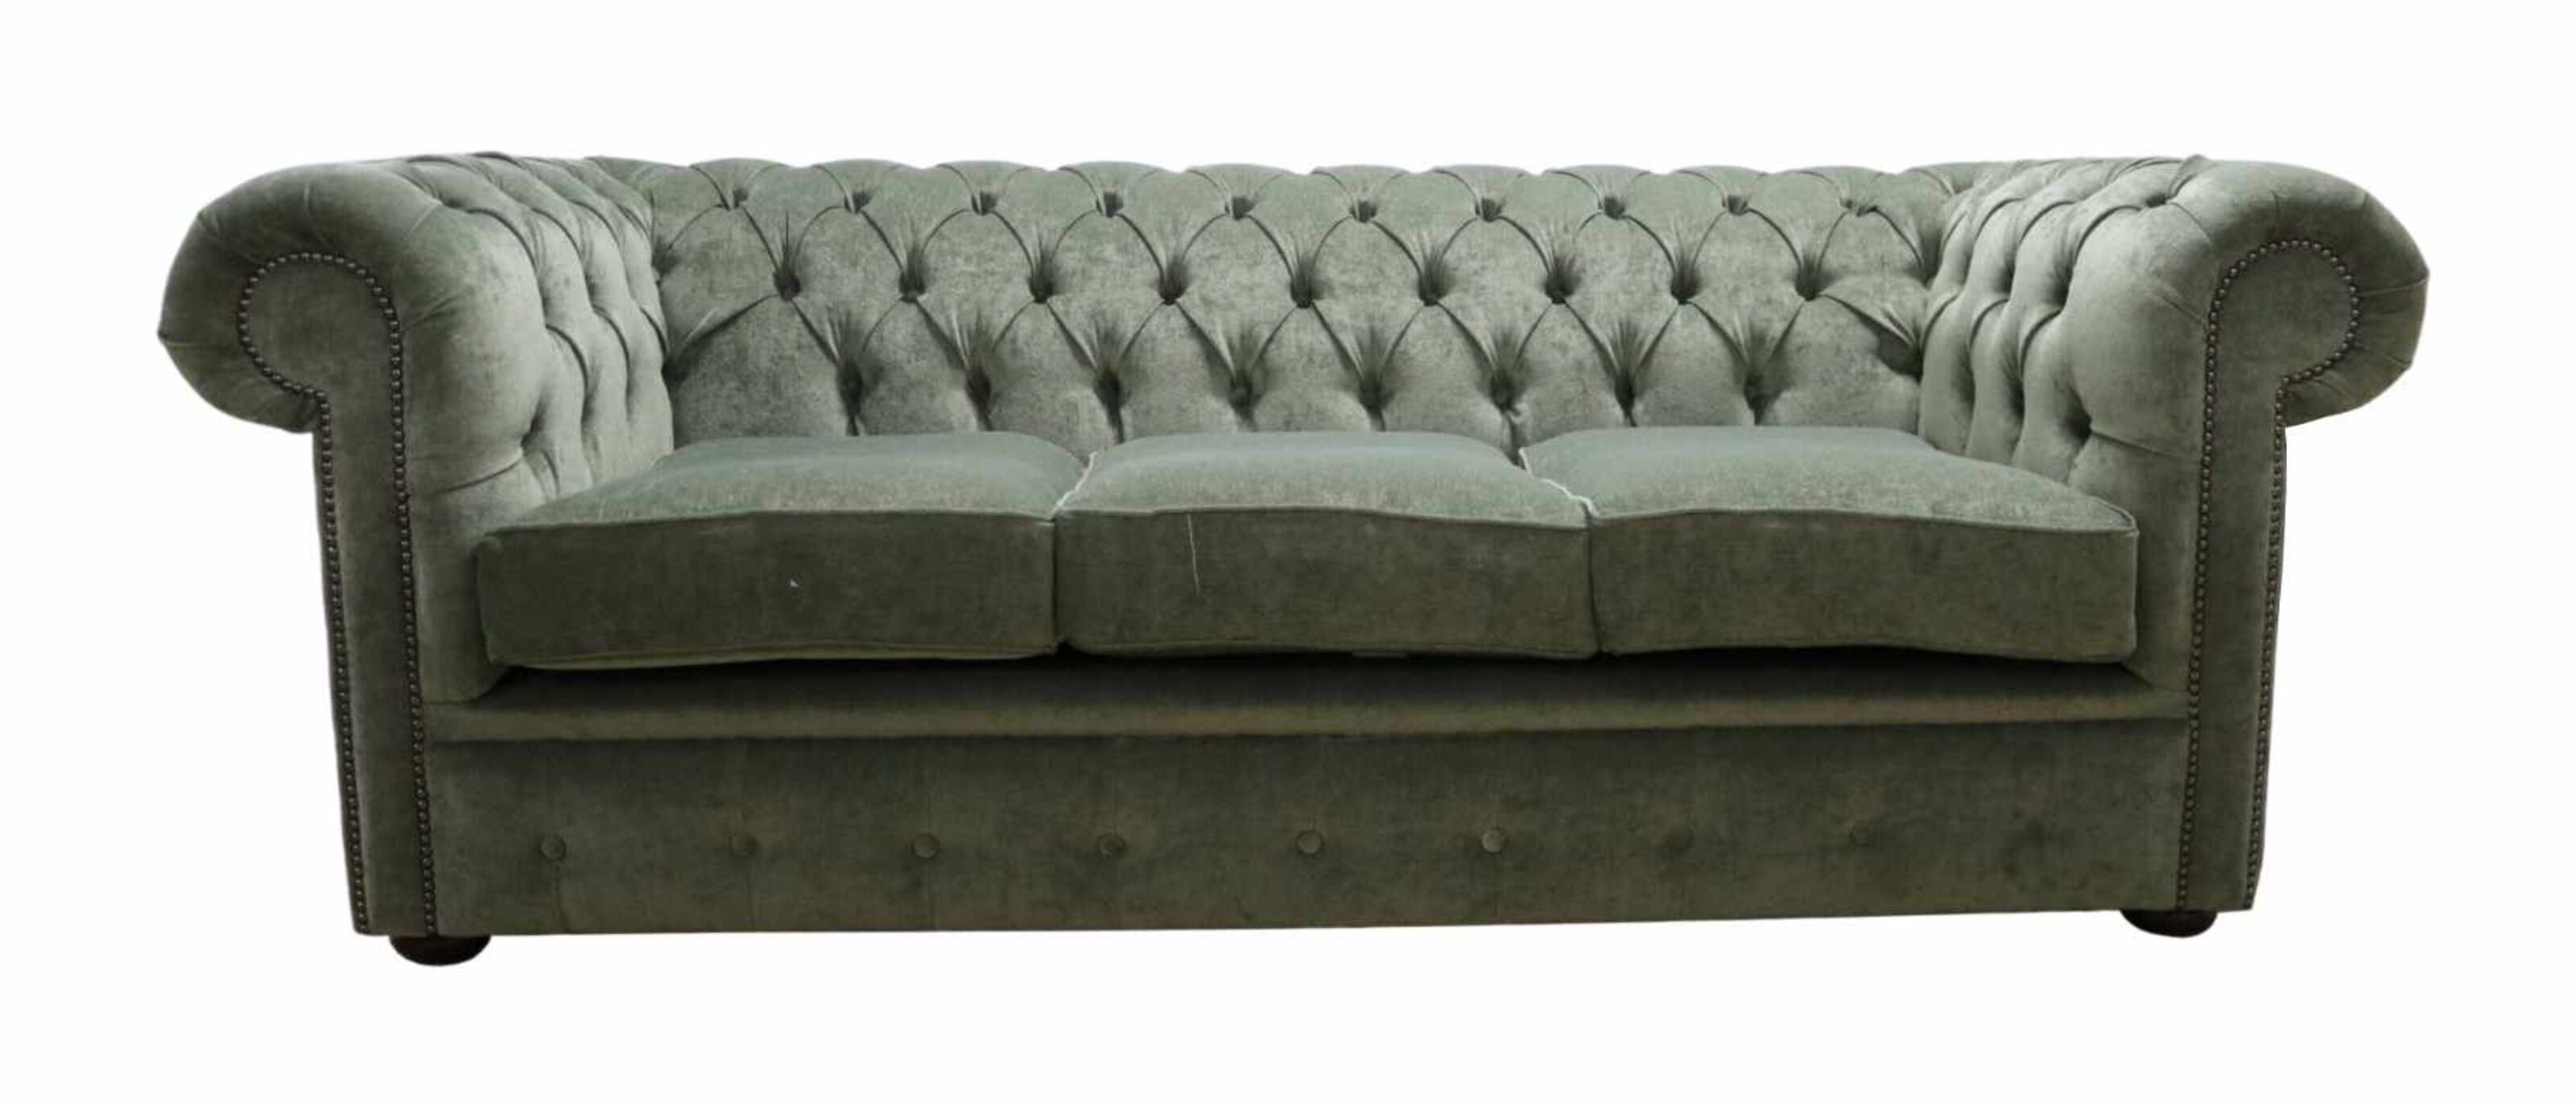 Deal Discovery Scouring Done deal for Chesterfield Sofa Gems  %Post Title